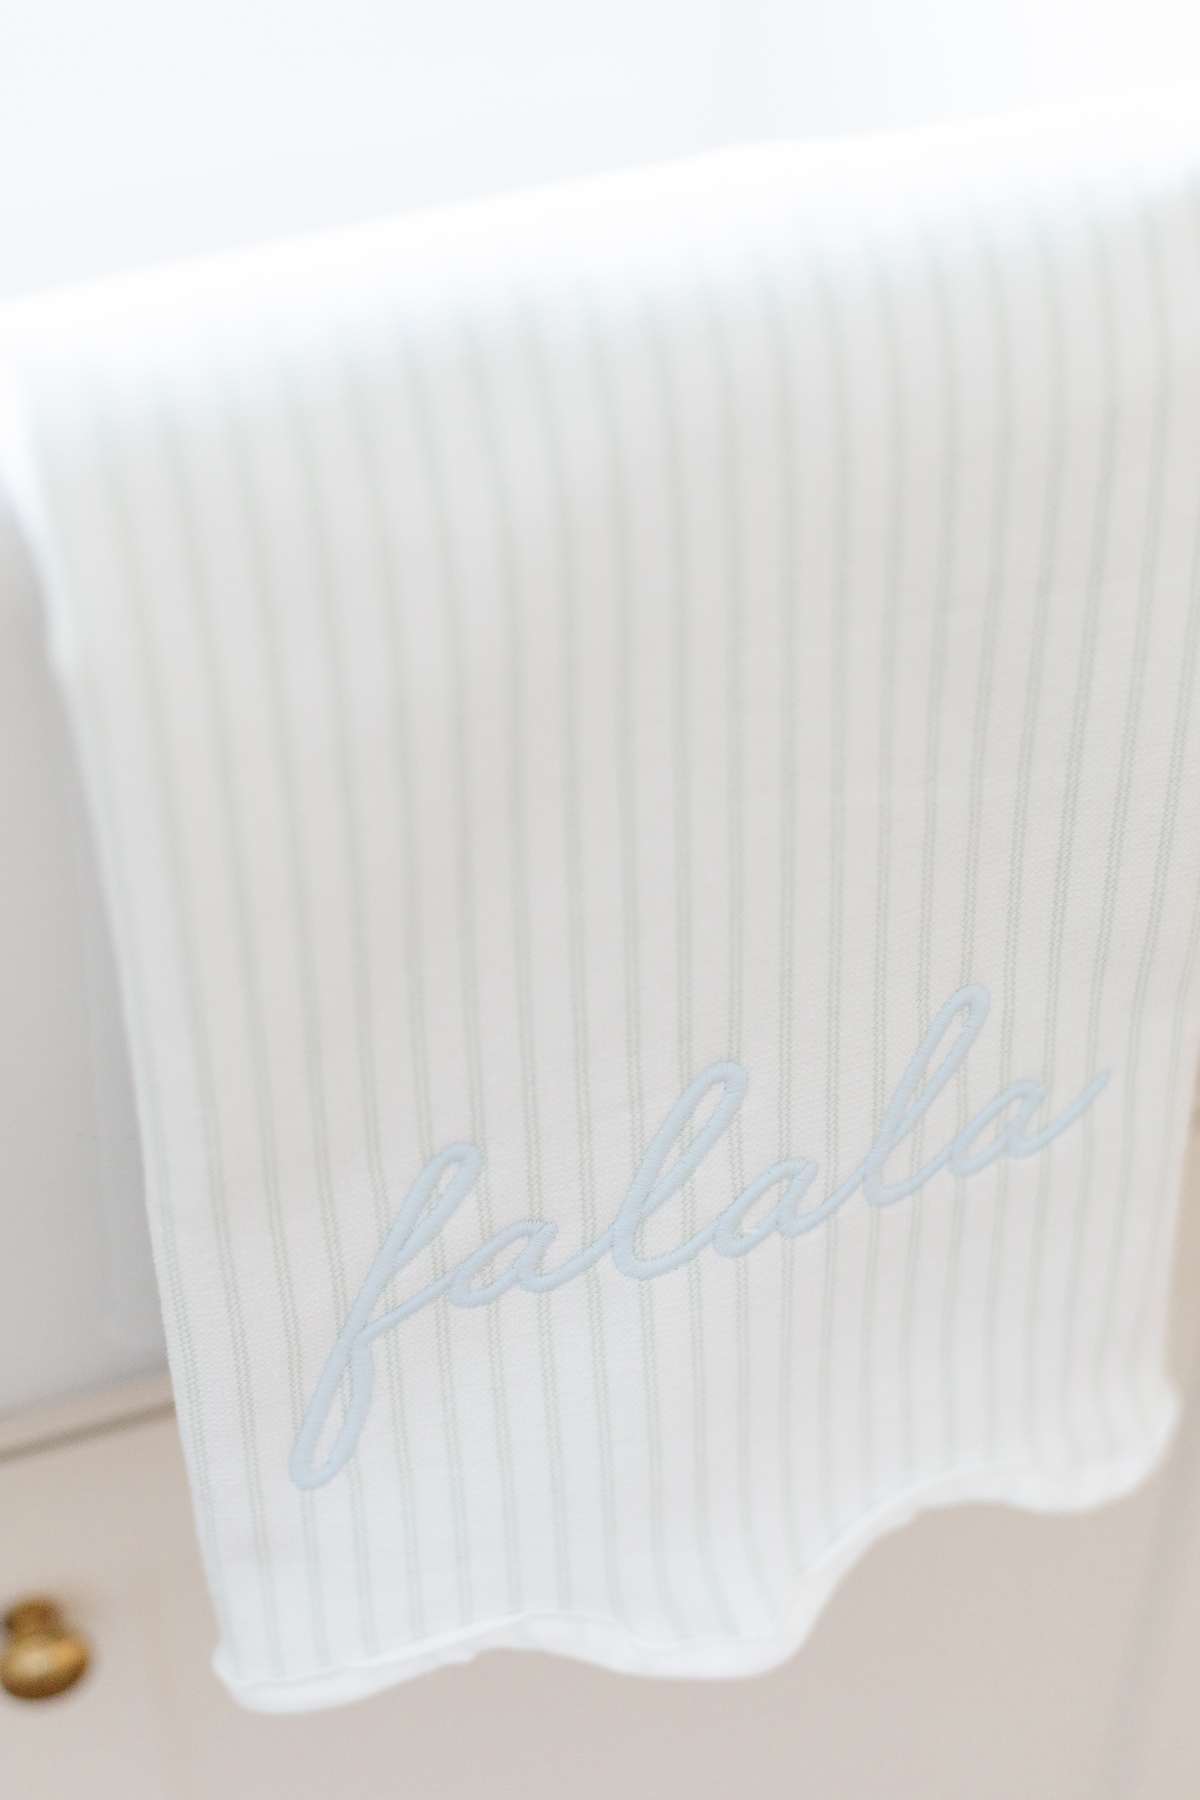 A faalis-themed kitchen gift, featuring a blue and white striped towel with the word faalis on it.